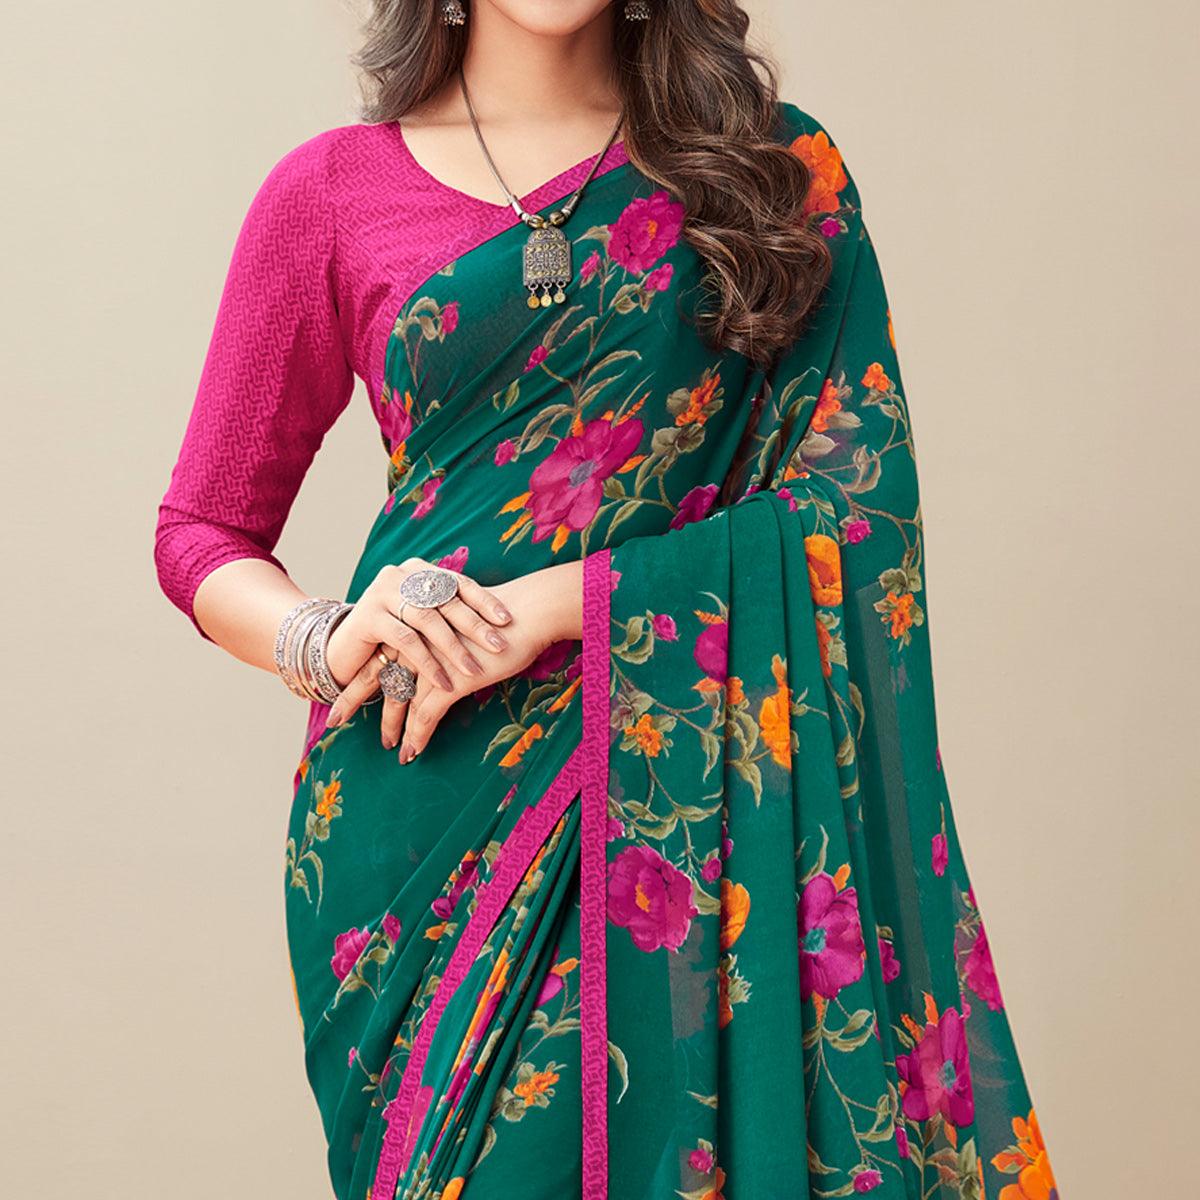 Turquoise Floral Printed Georgette Saree - Peachmode